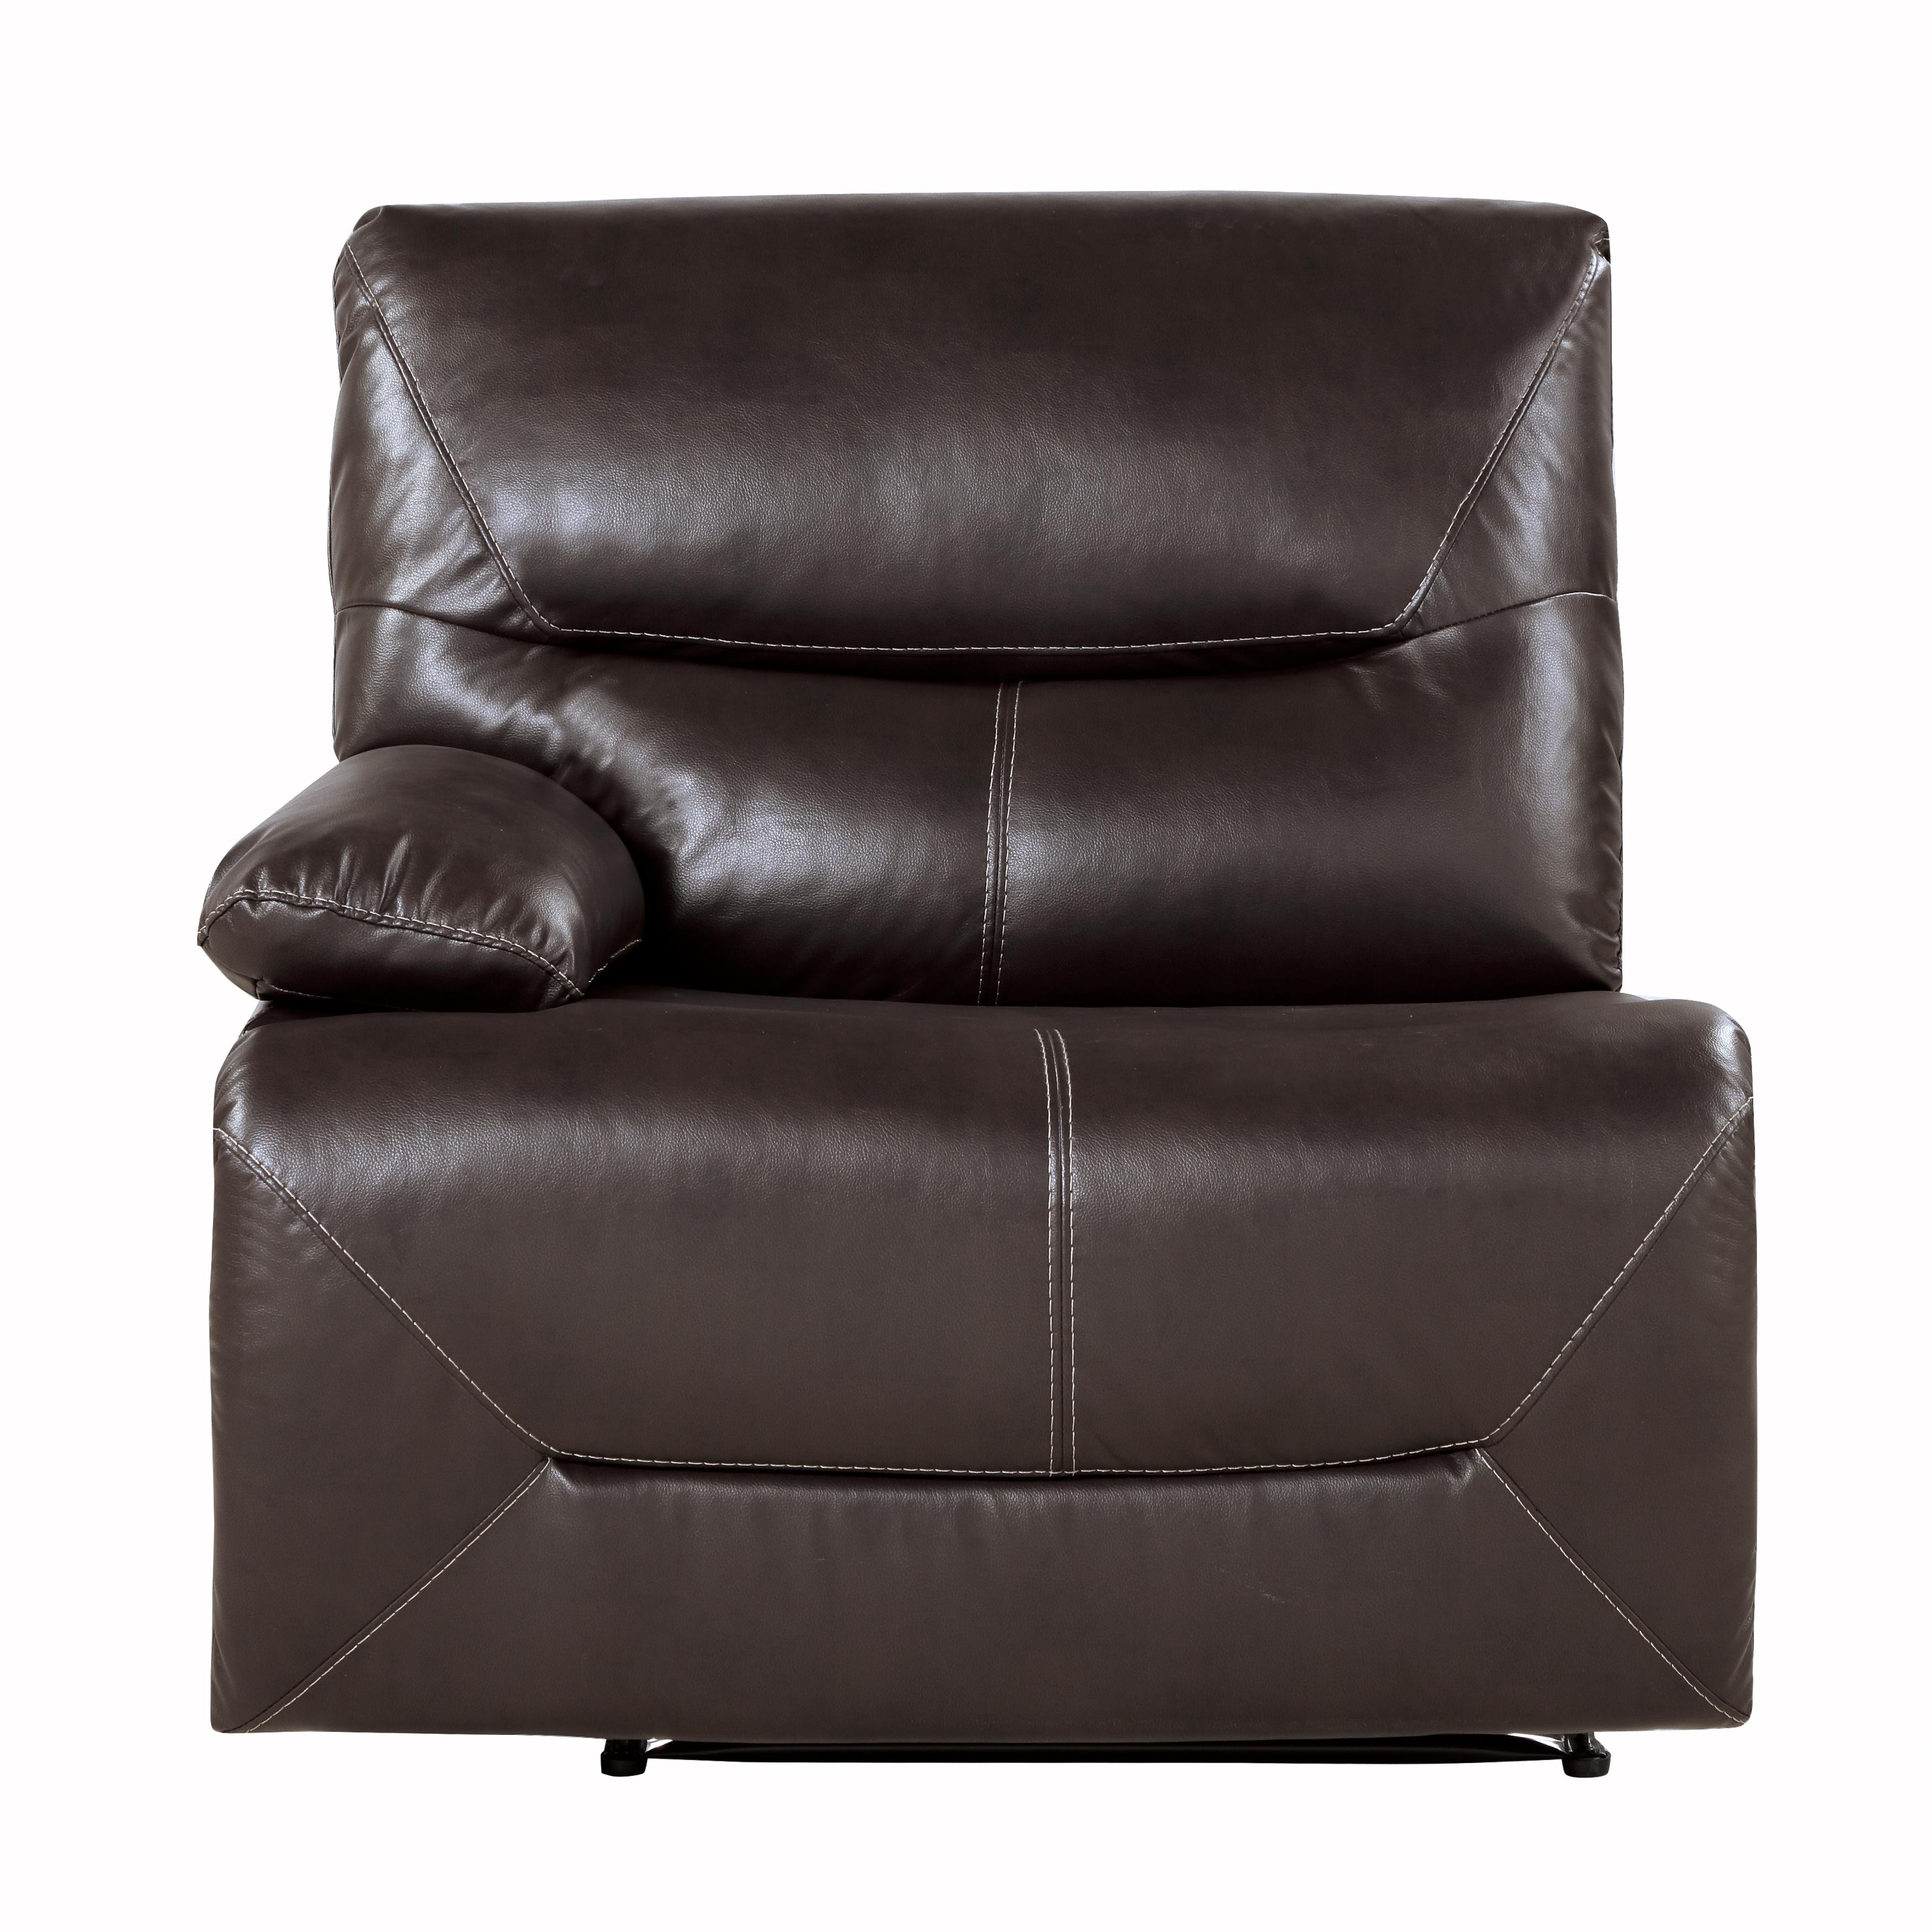 Transitional Power Reclining Chair 9579BRW-LRPW Dyersburg 9579BRW-LRPW in Brown Faux Leather